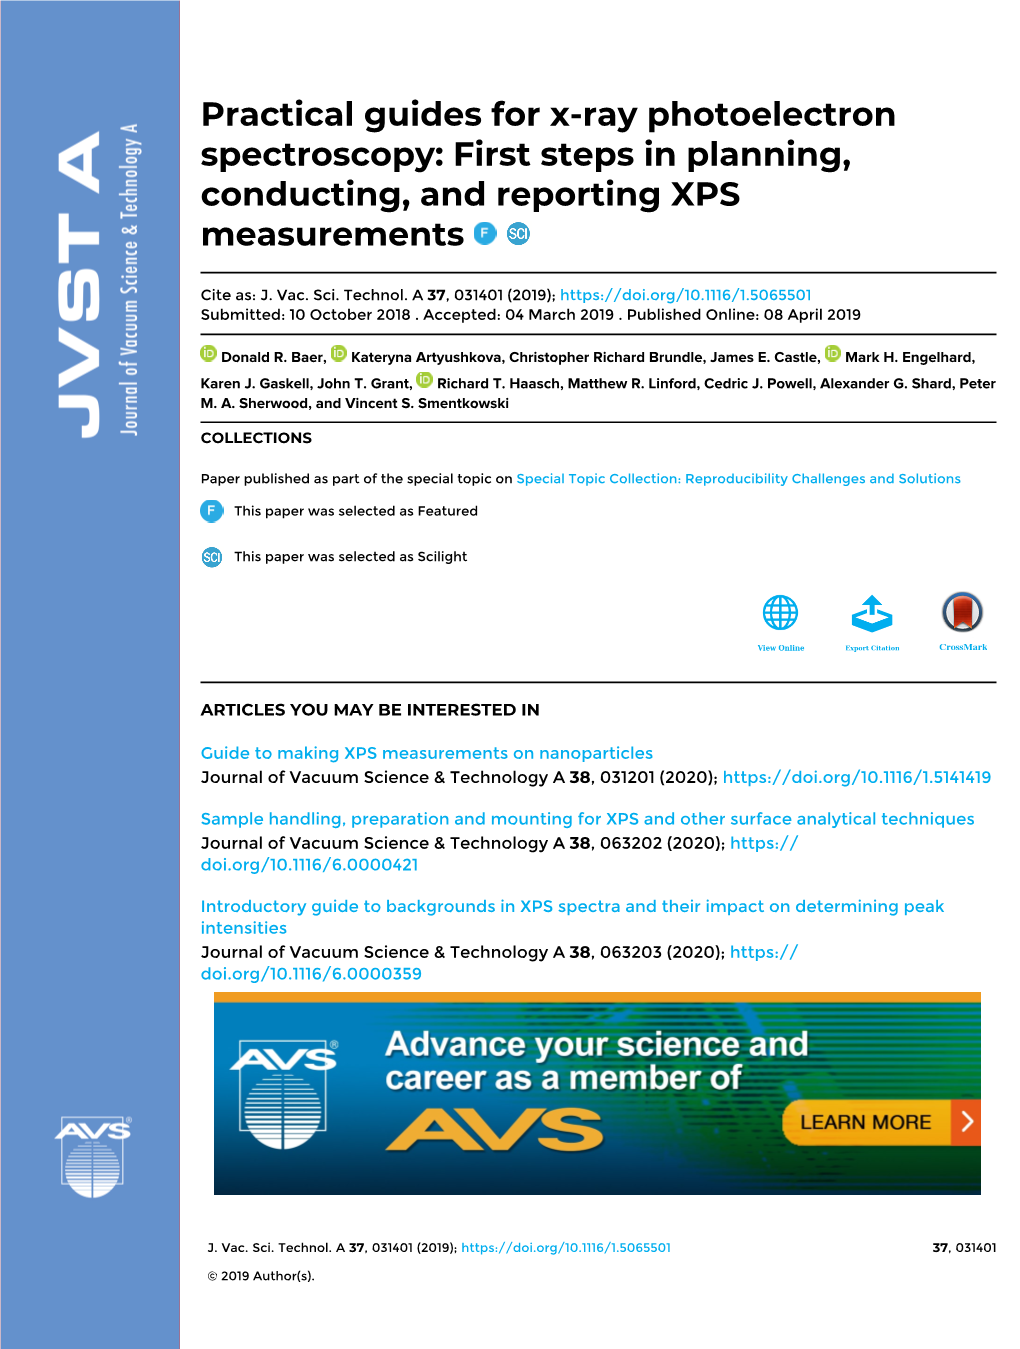 Practical Guides for X-Ray Photoelectron Spectroscopy: First Steps in Planning, Conducting, and Reporting XPS Measurements